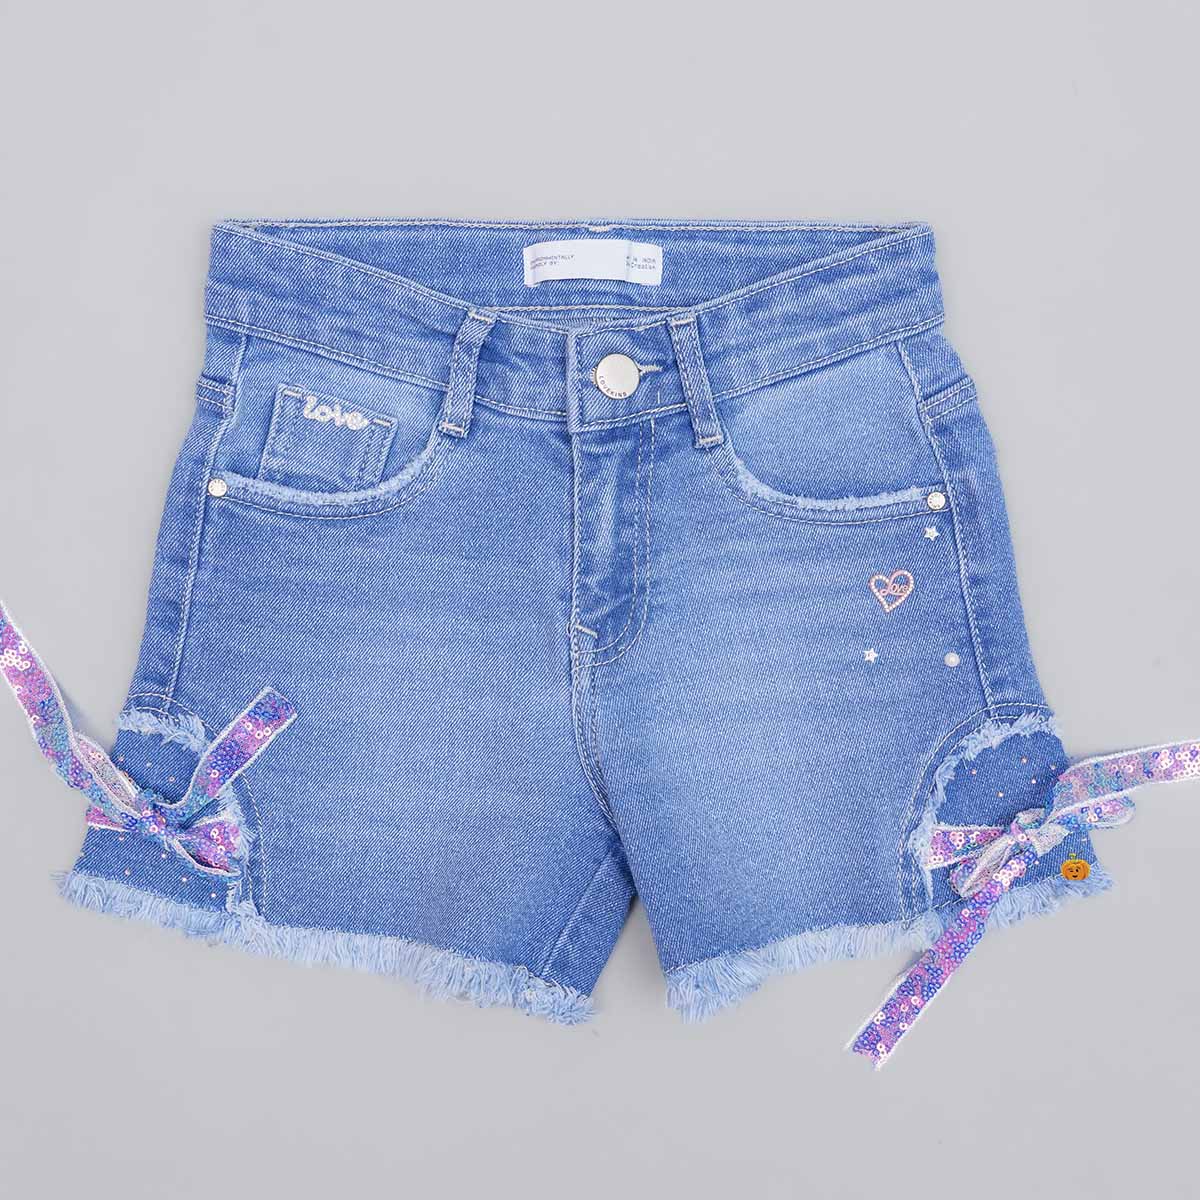 Buy Baby Little Girls Denim Shorts Set Ruffles Sleeve Lace Tops+Denim Jean  Short Outfits Set (White Romper +Jeans, 6-12 Months) at Amazon.in